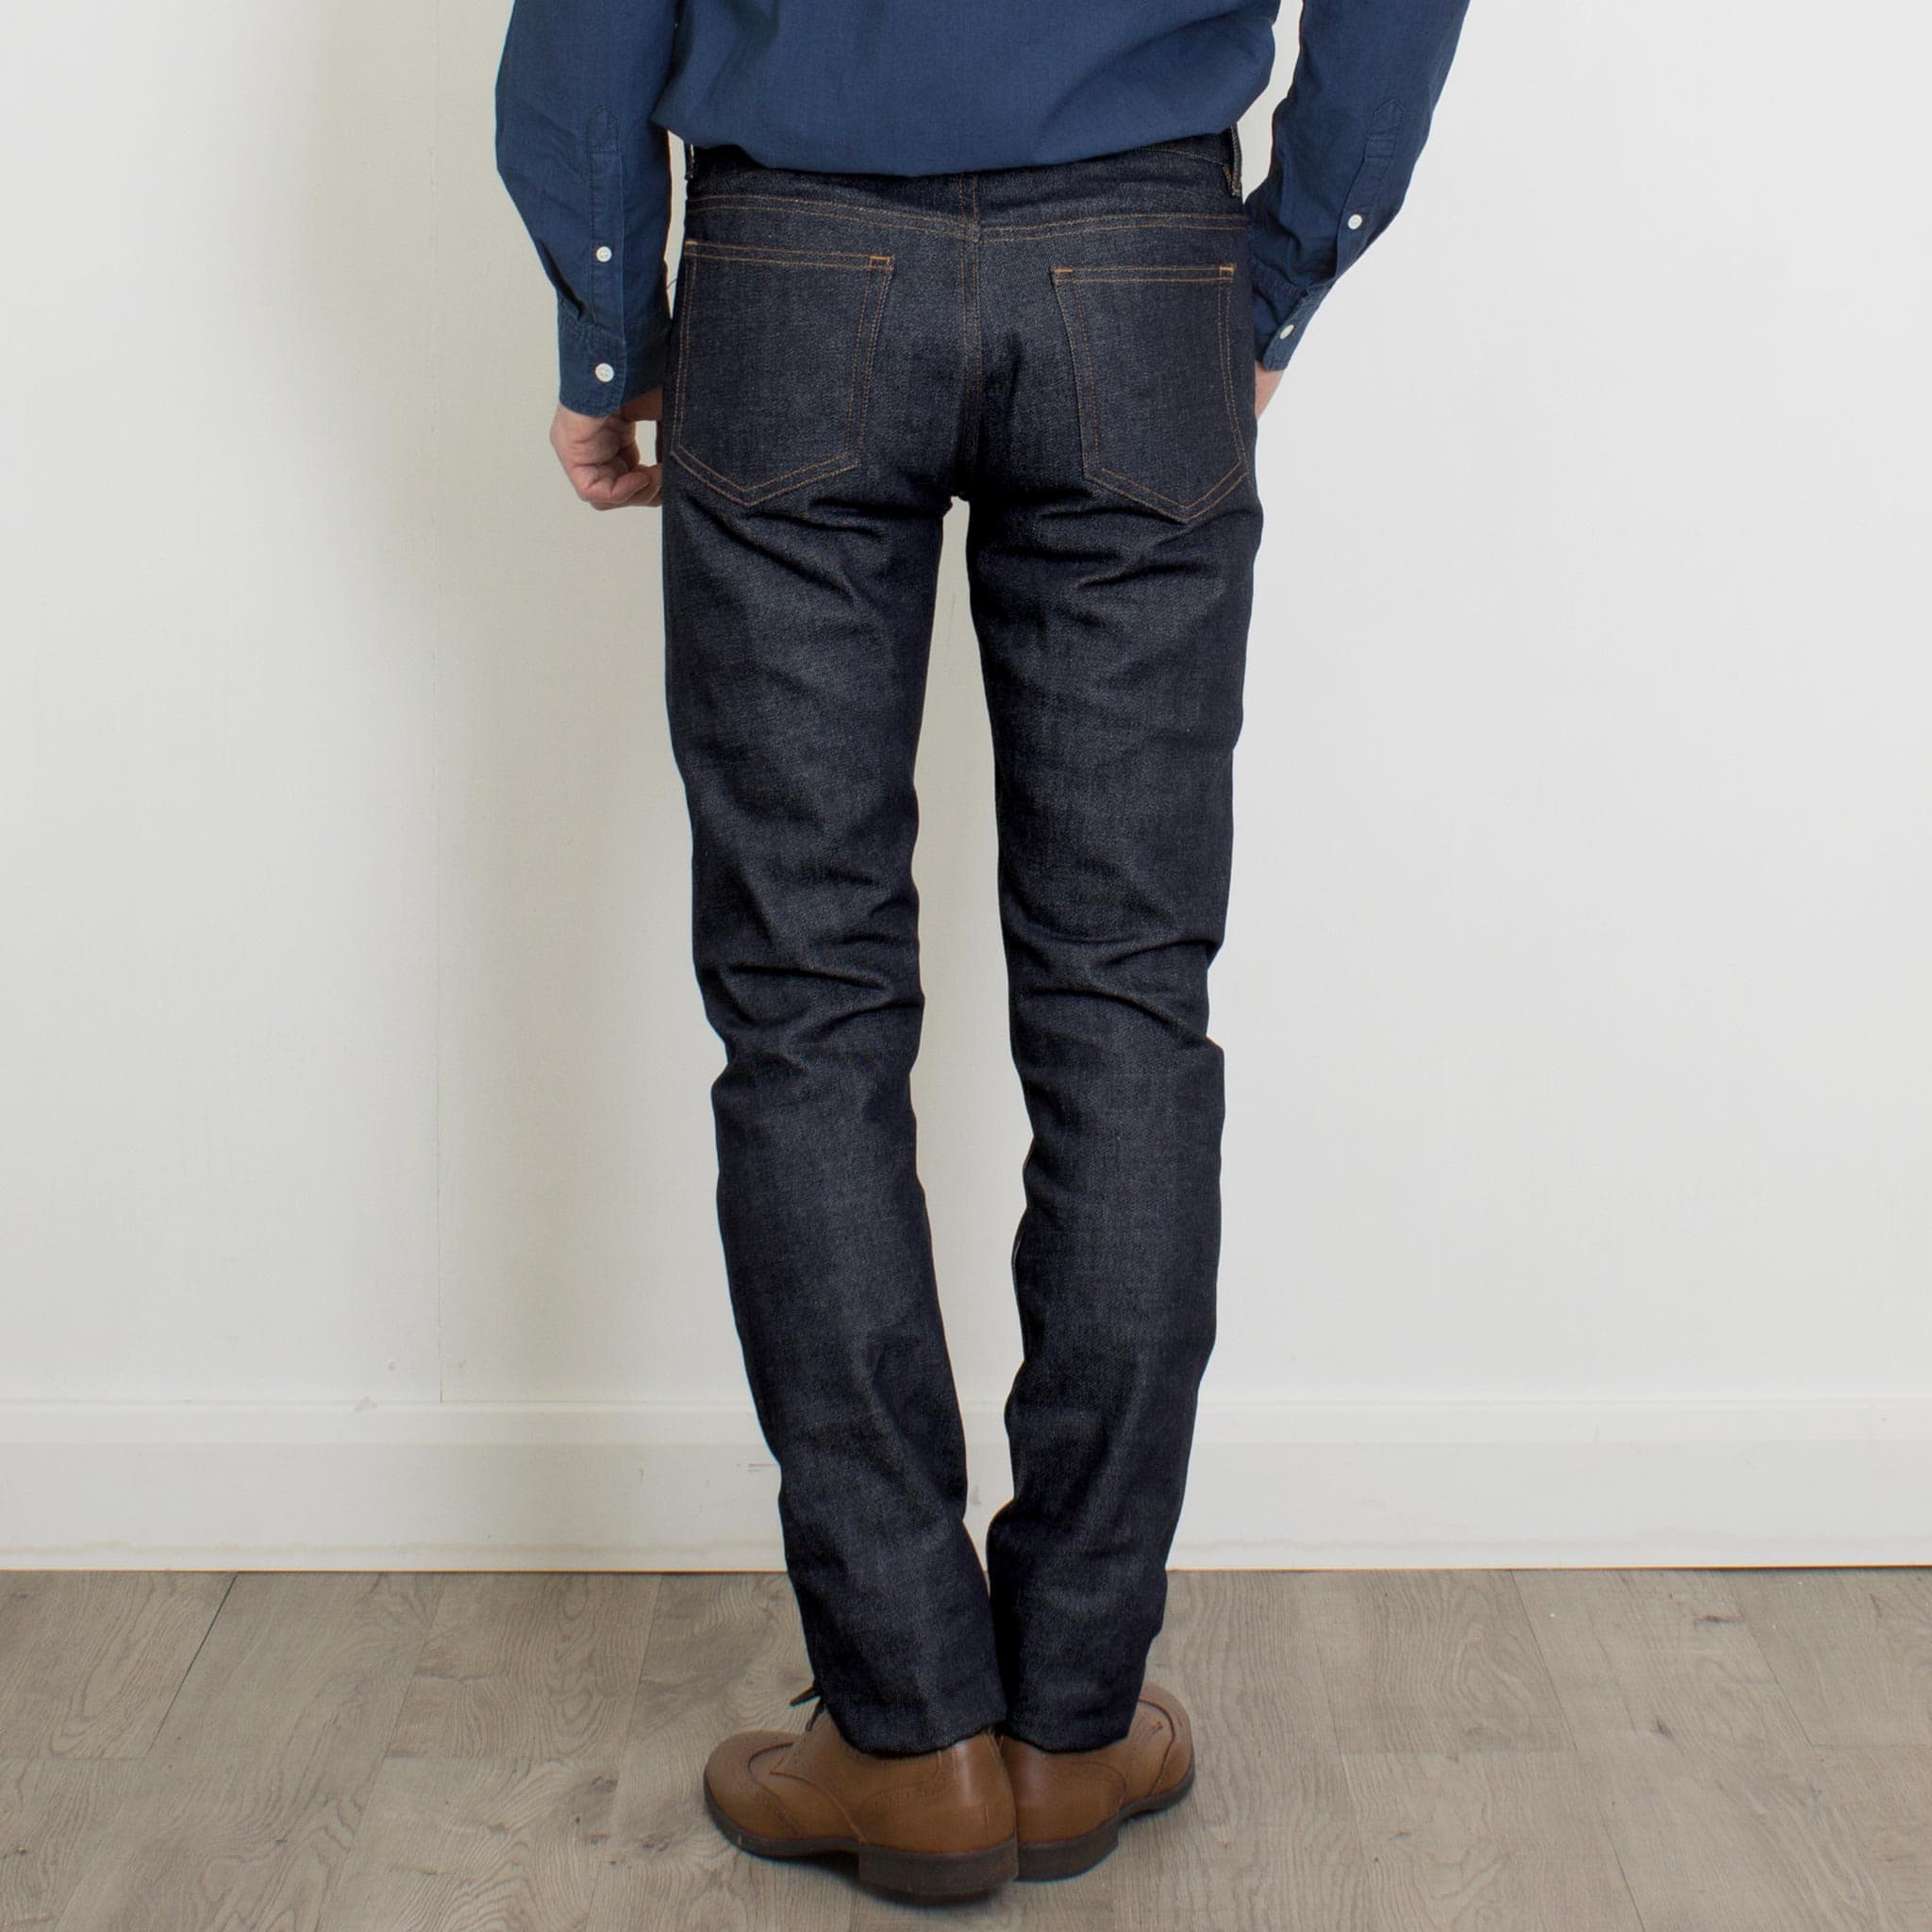 A.P.C. - PETIT NEW STANDARD - MID RISE STRAIGHT JEANS - CODBS 